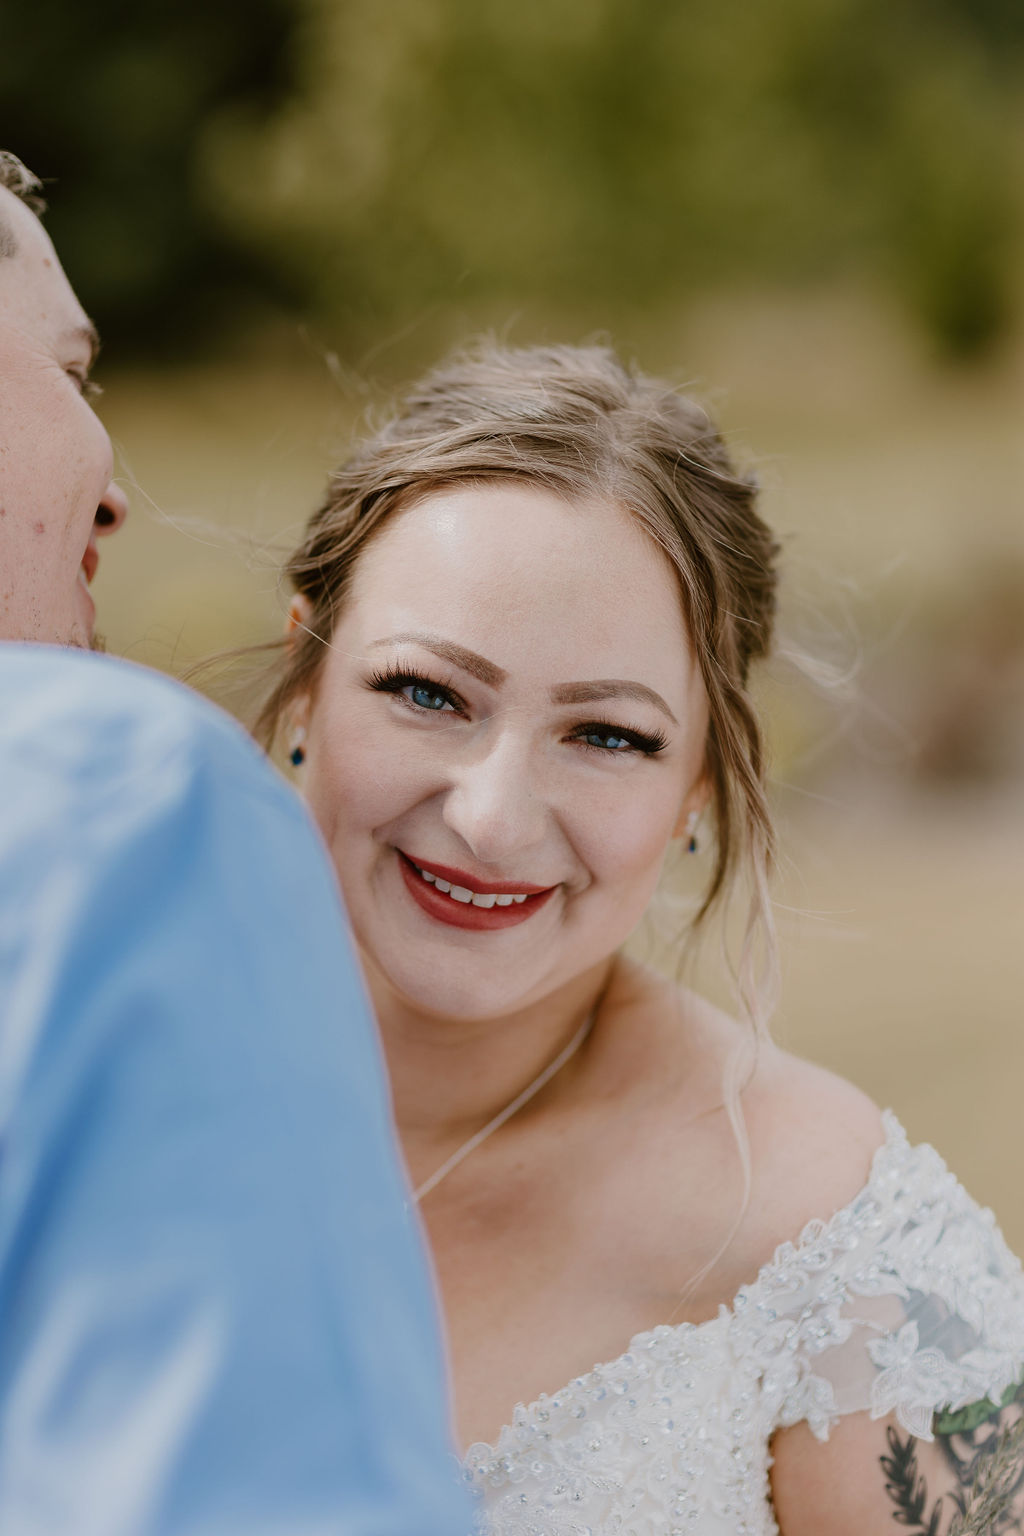 A close-up of the bride smiling warmly at the camera, highlighting her makeup and hairstyle.